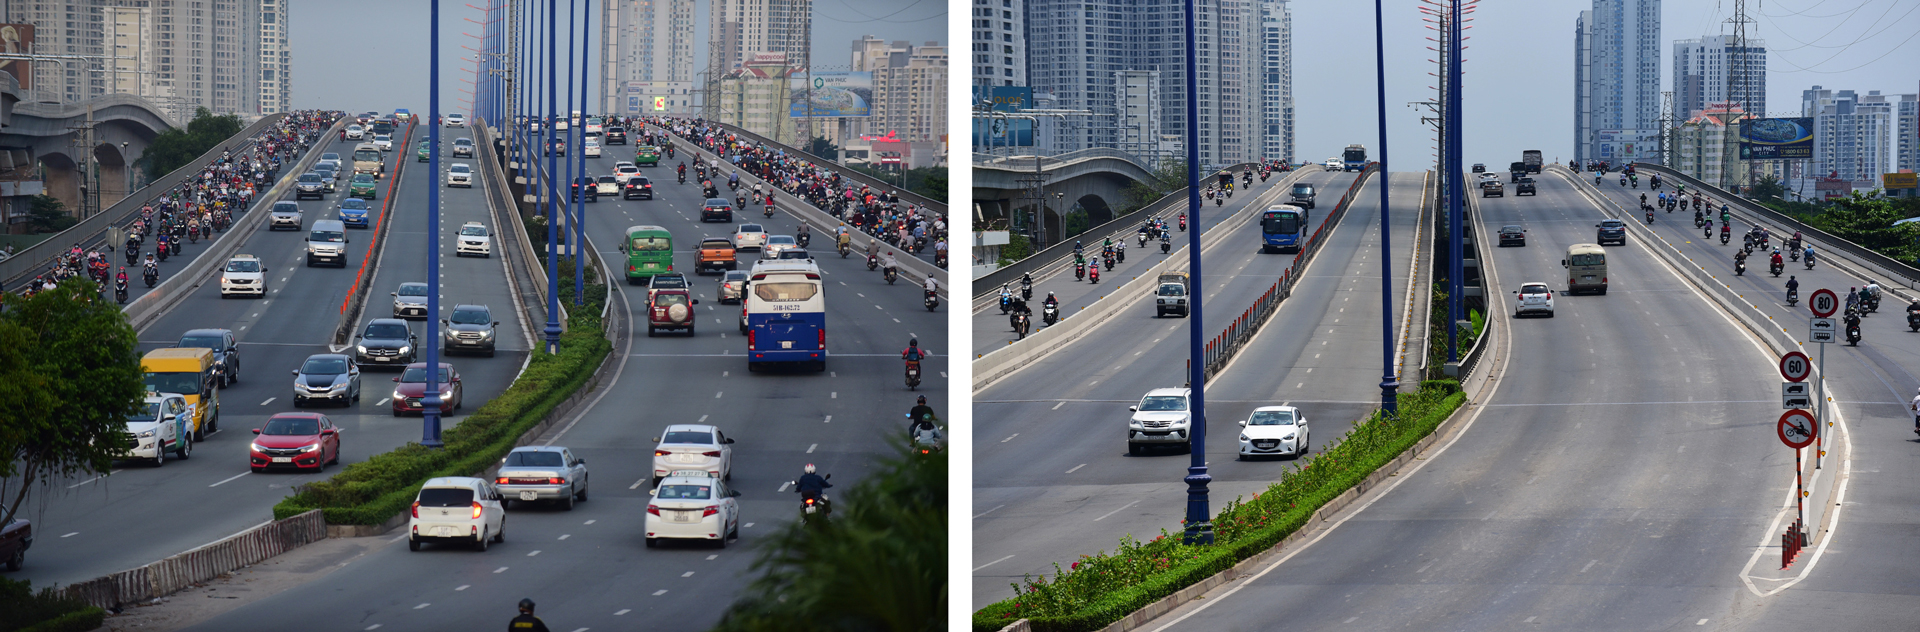 Fewer vehicles (right) are seen on Saigon Bridge, which connects Binh Thanh District and District 2 in Ho Chi Minh City, Vietnam, during the COVID-19 epidemic compared to before (left). Photos: Truc Phuong / Tuoi Tre